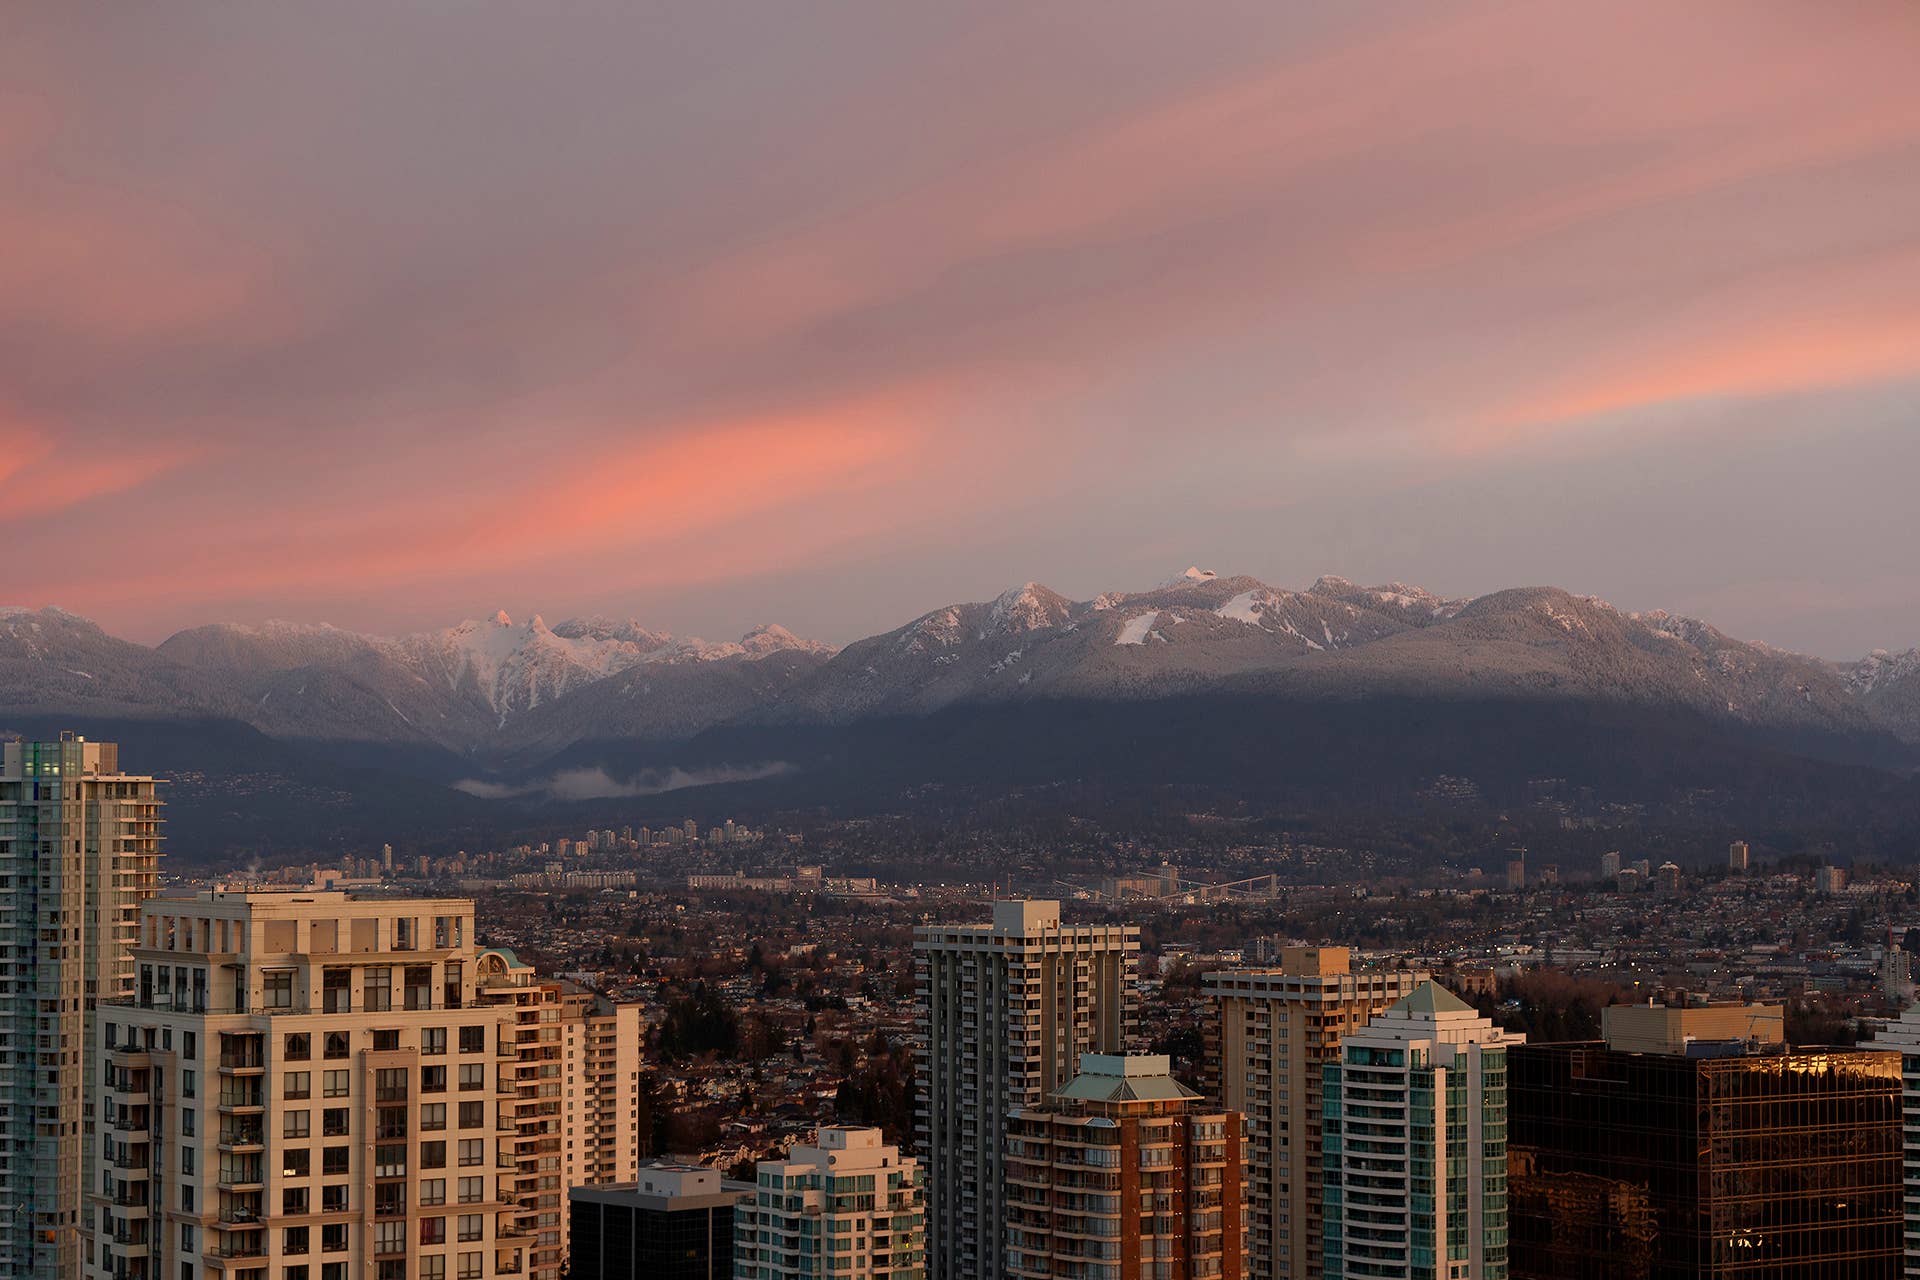 A sunset displays over the cityscape of Vancouver.